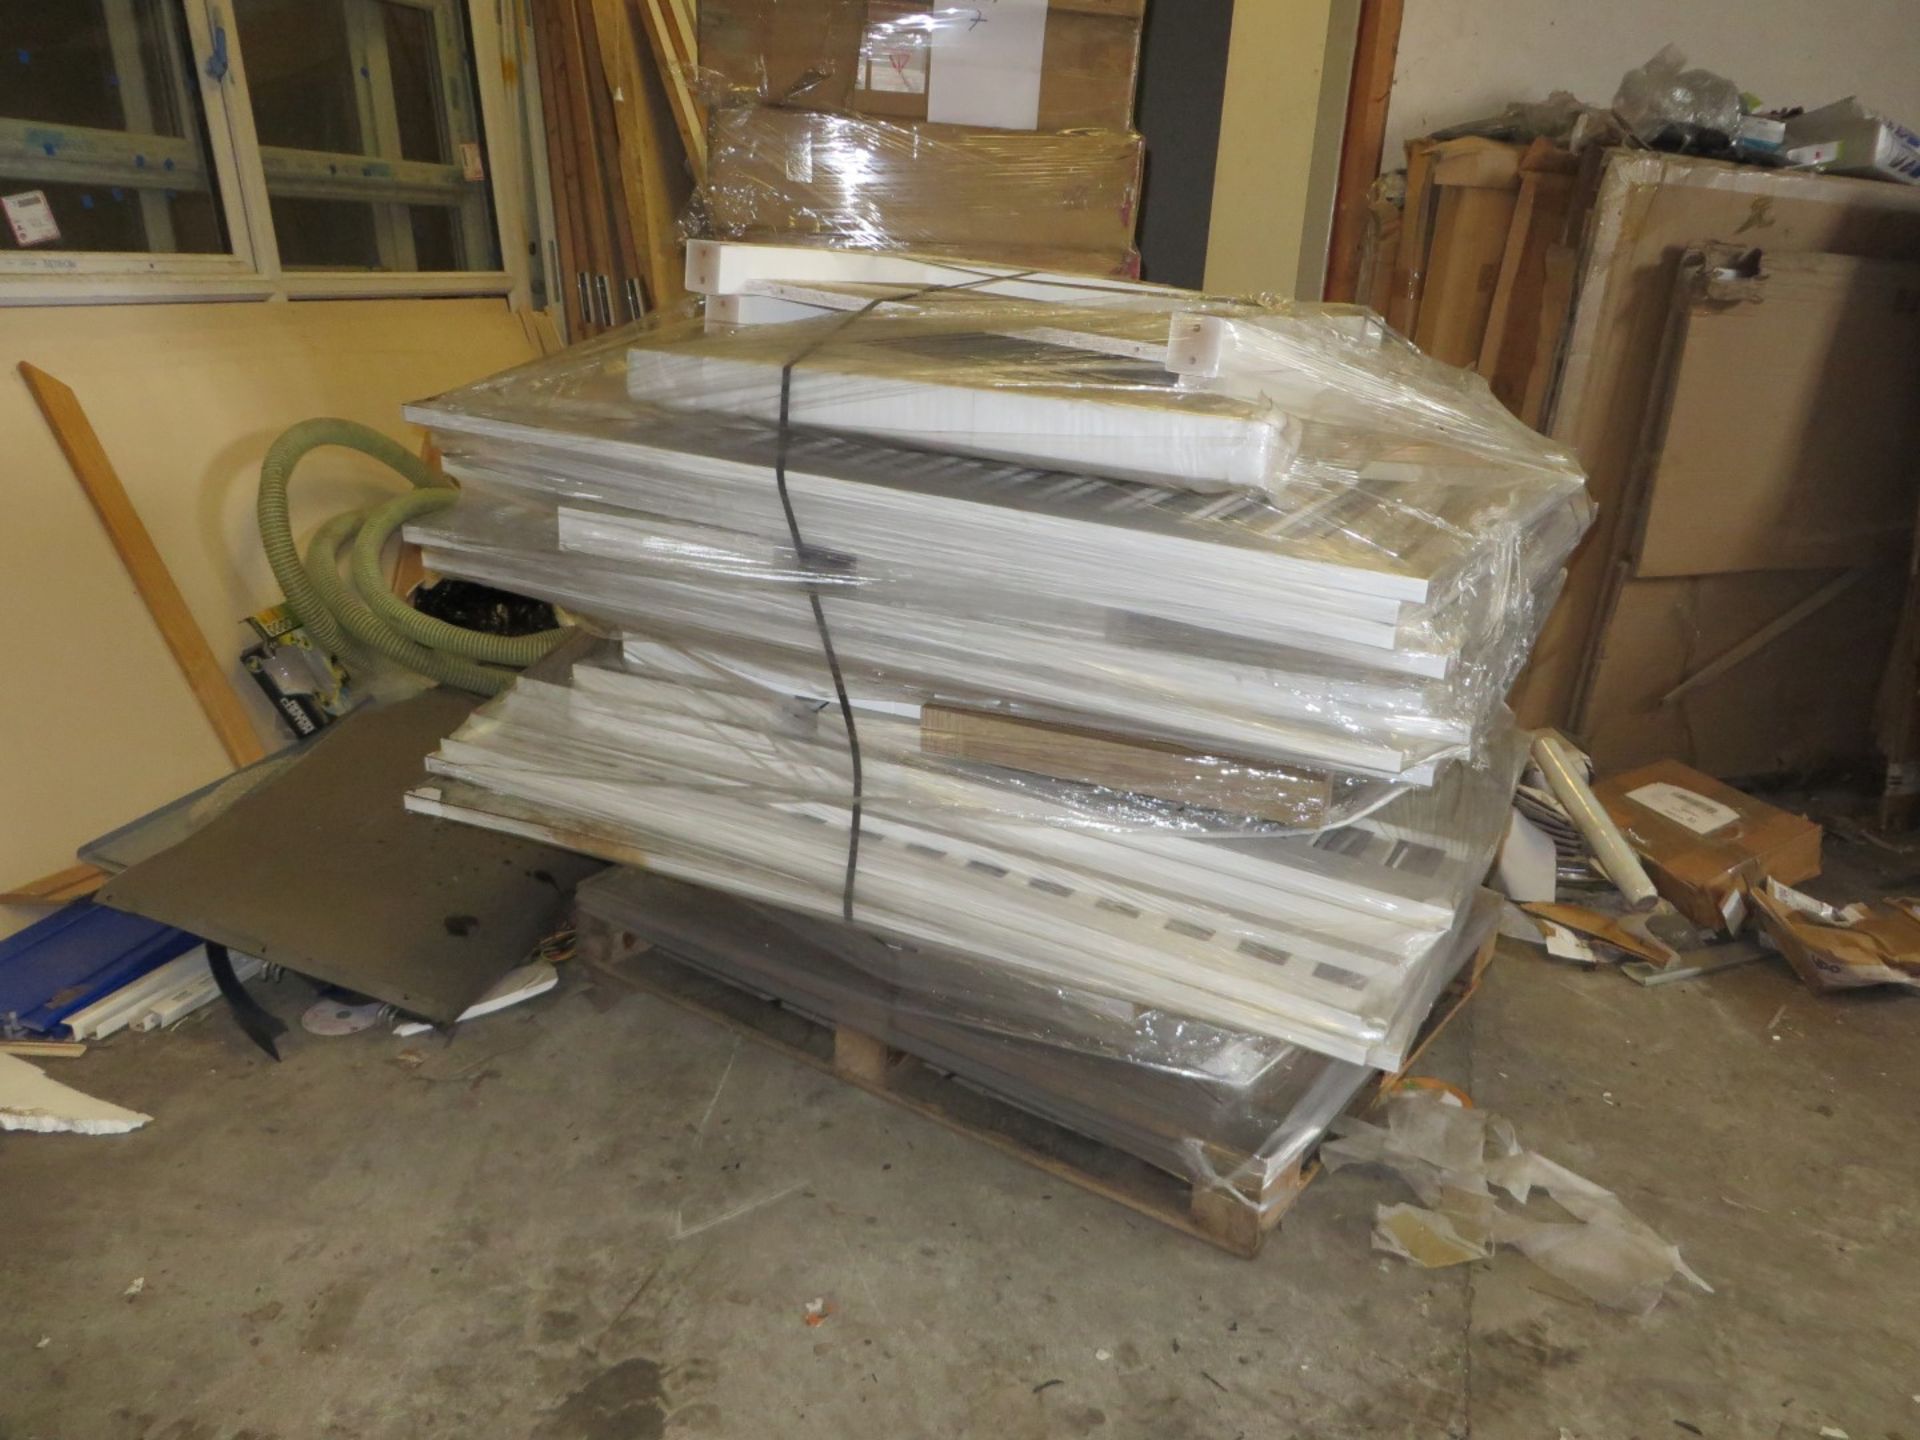 12 x Pallets of Assorted Silver Cross Nursery Furniture - CL185 - Ref: DSYMULTI - Location: Stoke-on - Image 6 of 13